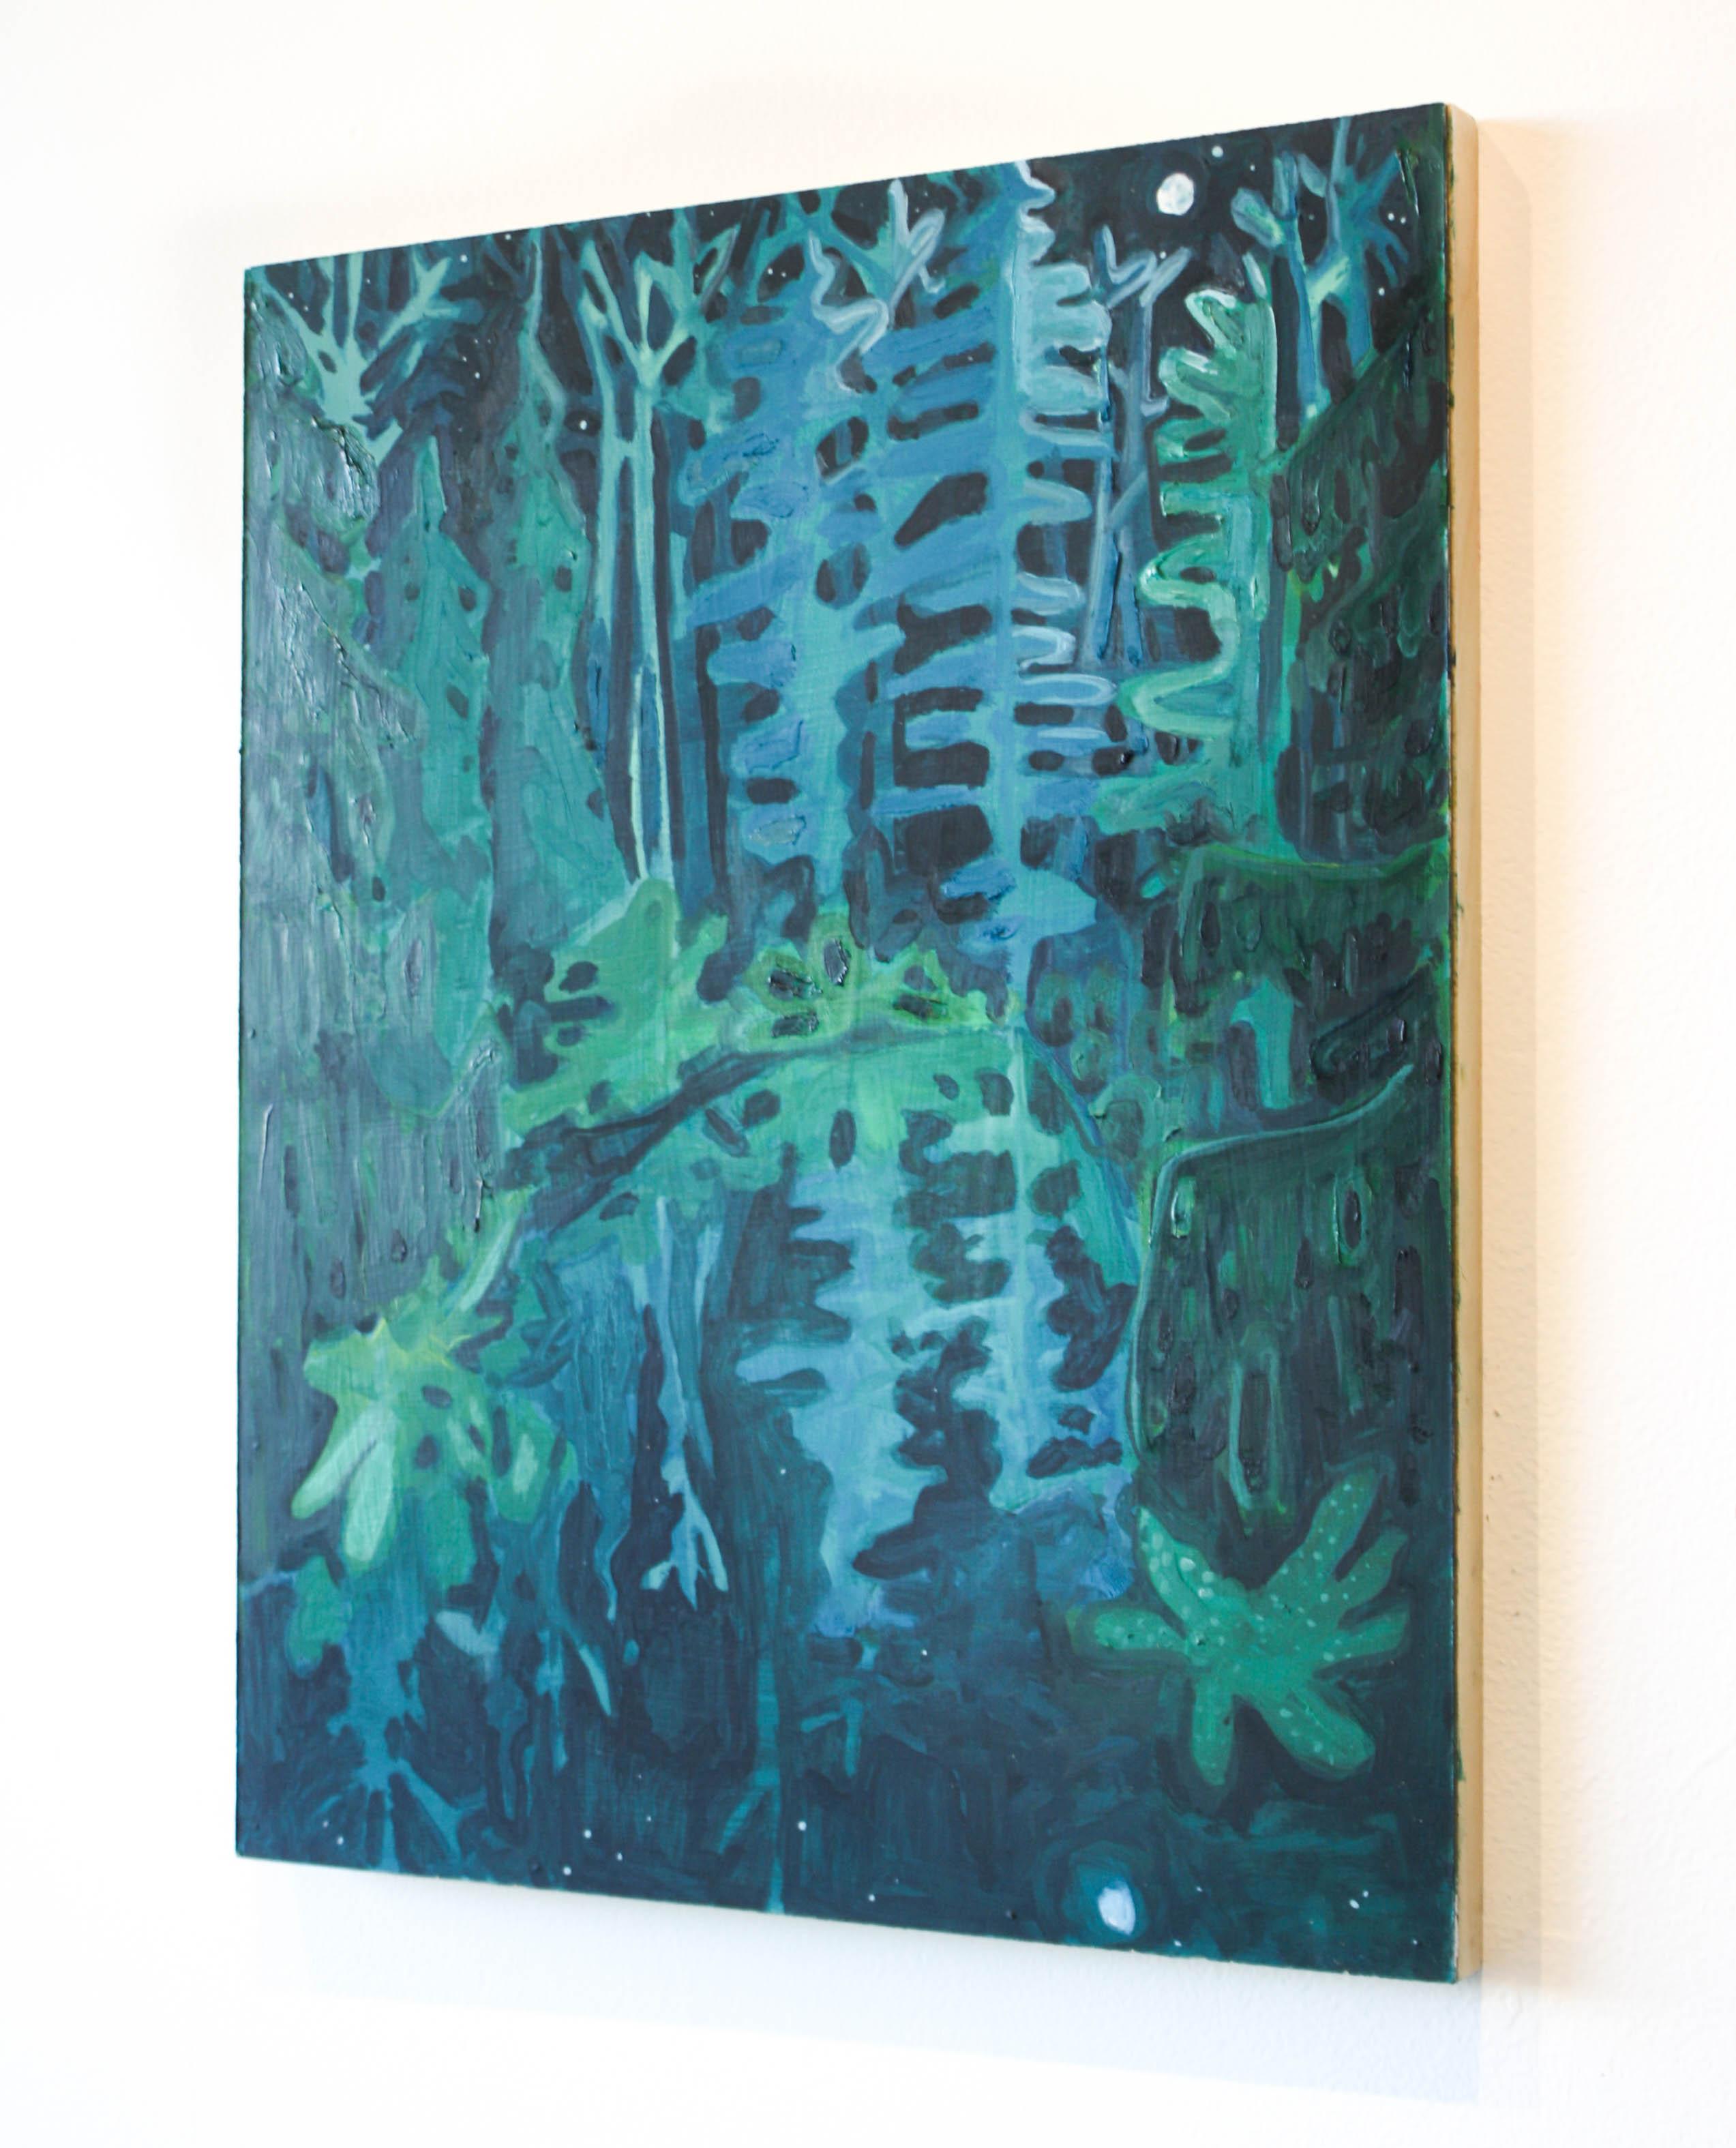 This landscape oil painting is a nighttime depiction of trees rendered using deep blues and teals. 

My work is about Place. For me, no space is permanent and home is not a fixed entity. Pulling from themes commonly found in German Romantic